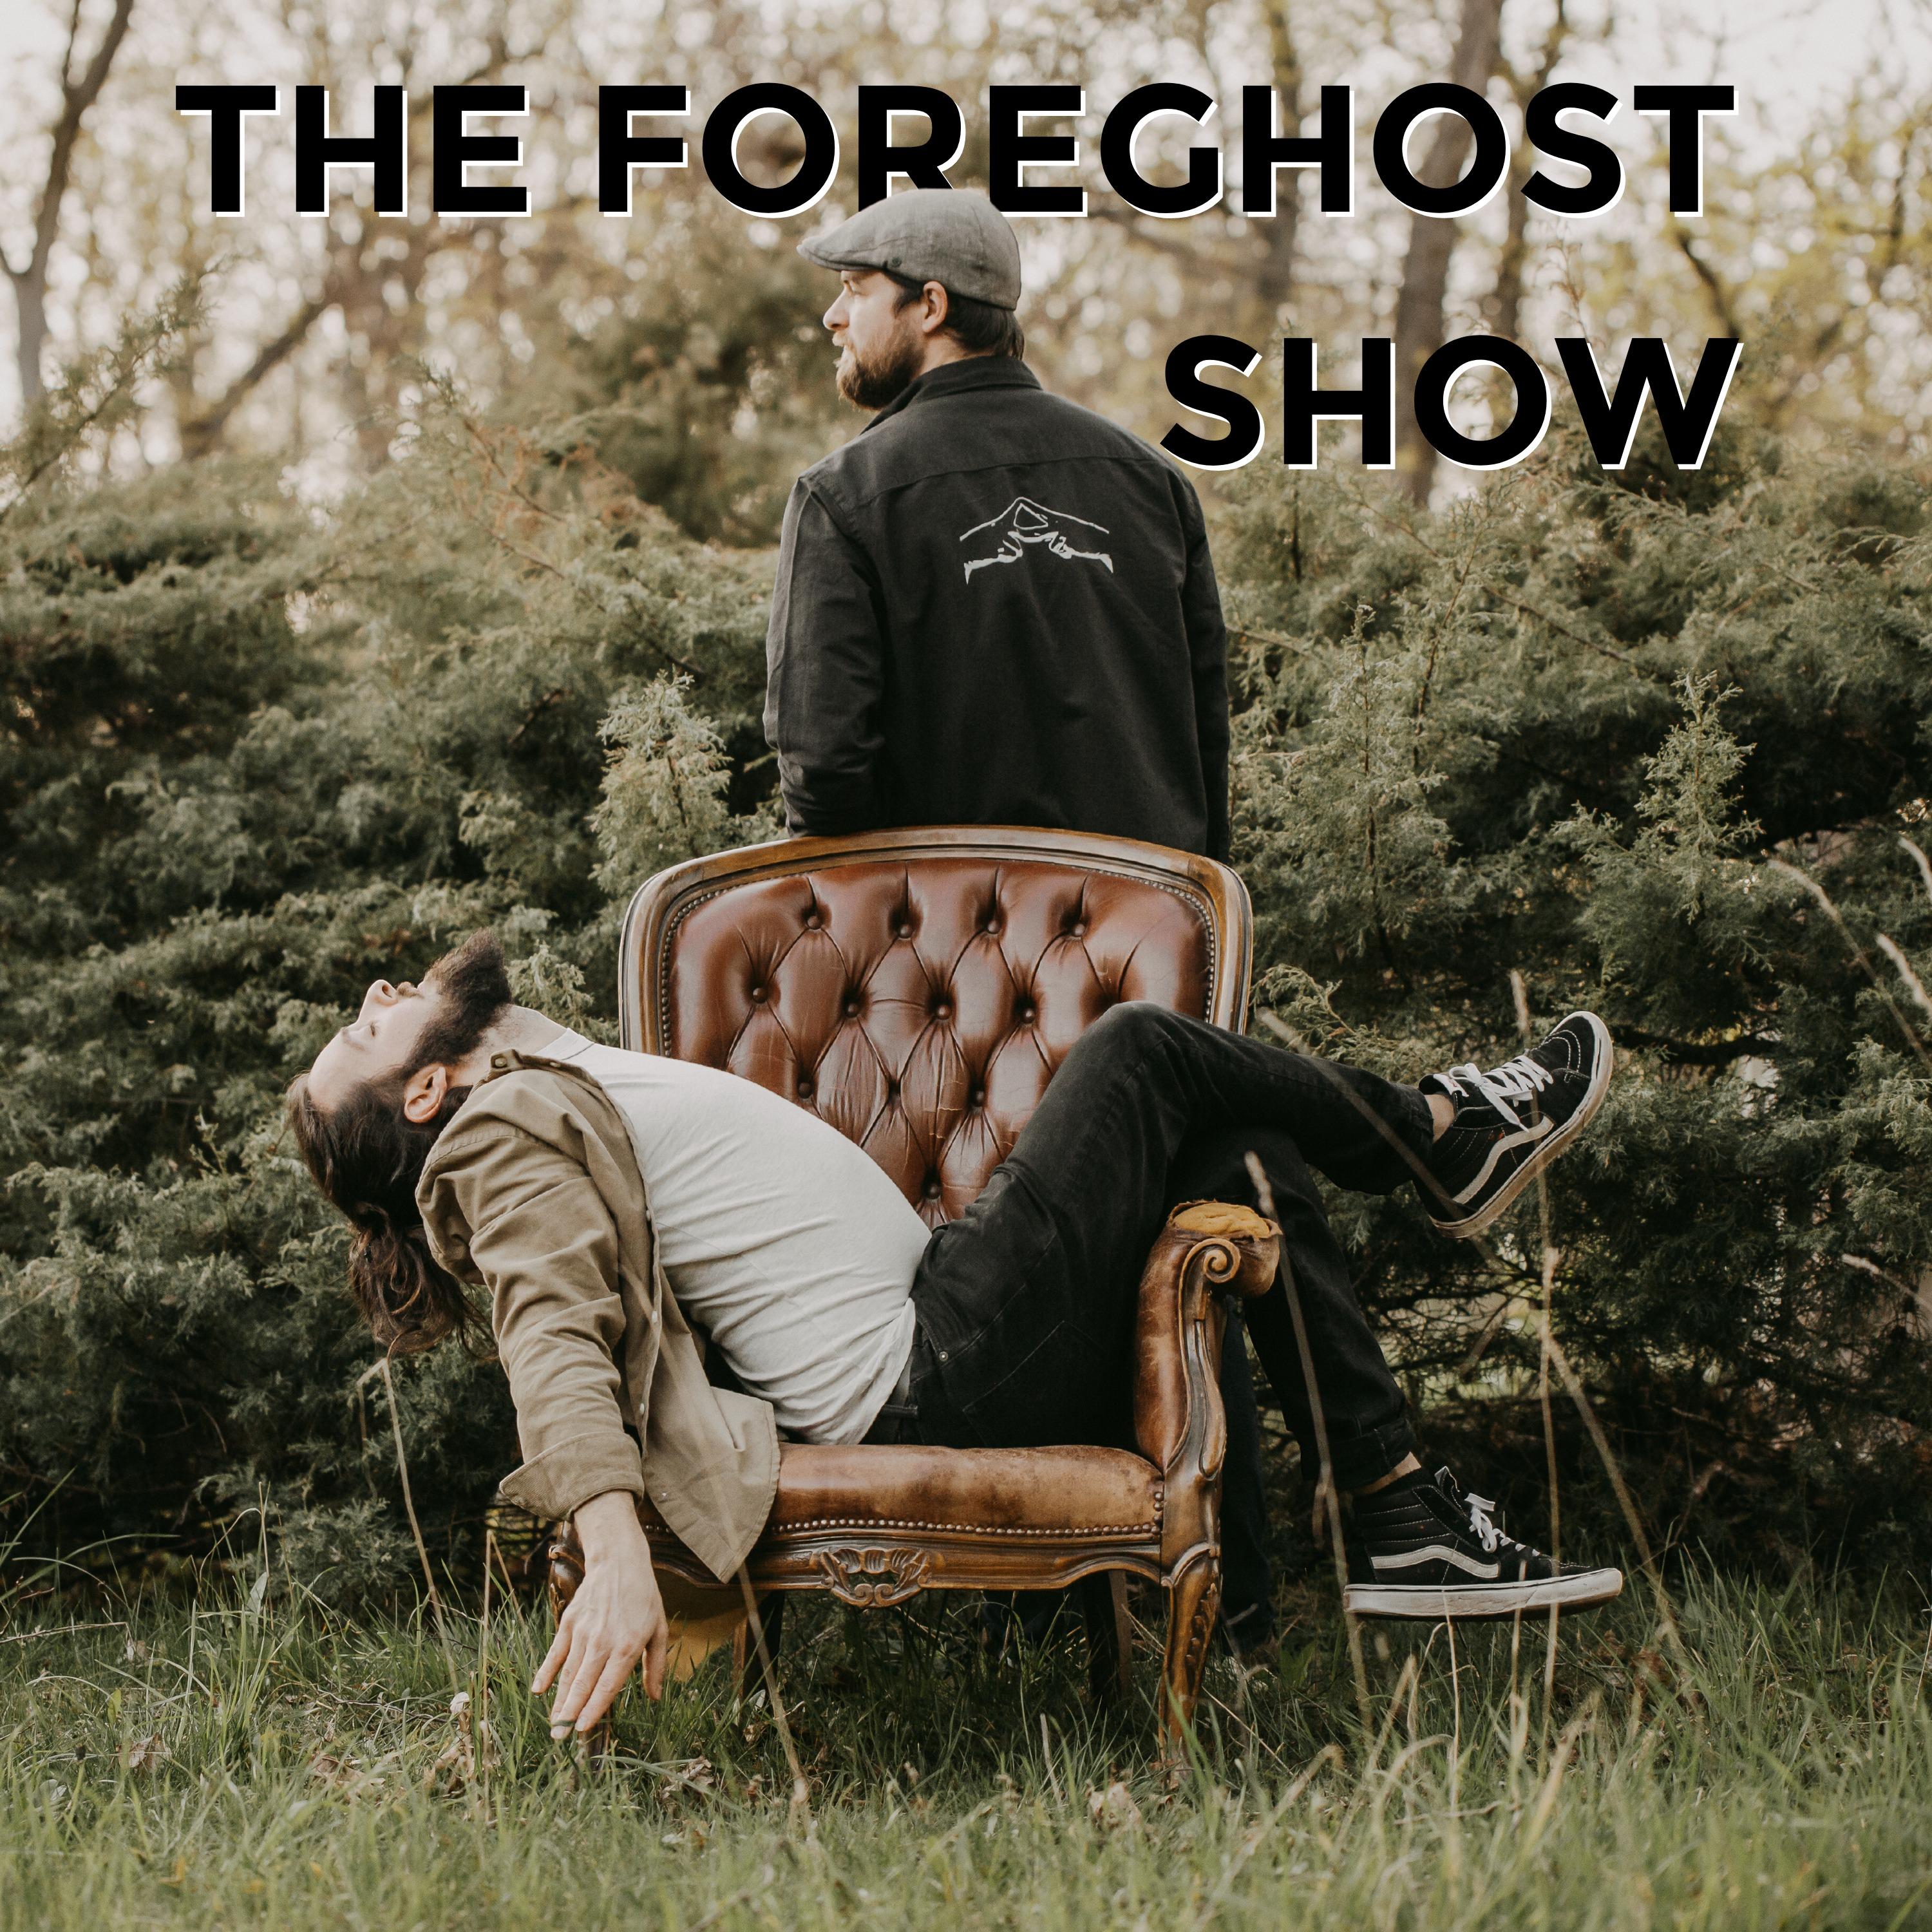 The Foreghost Show